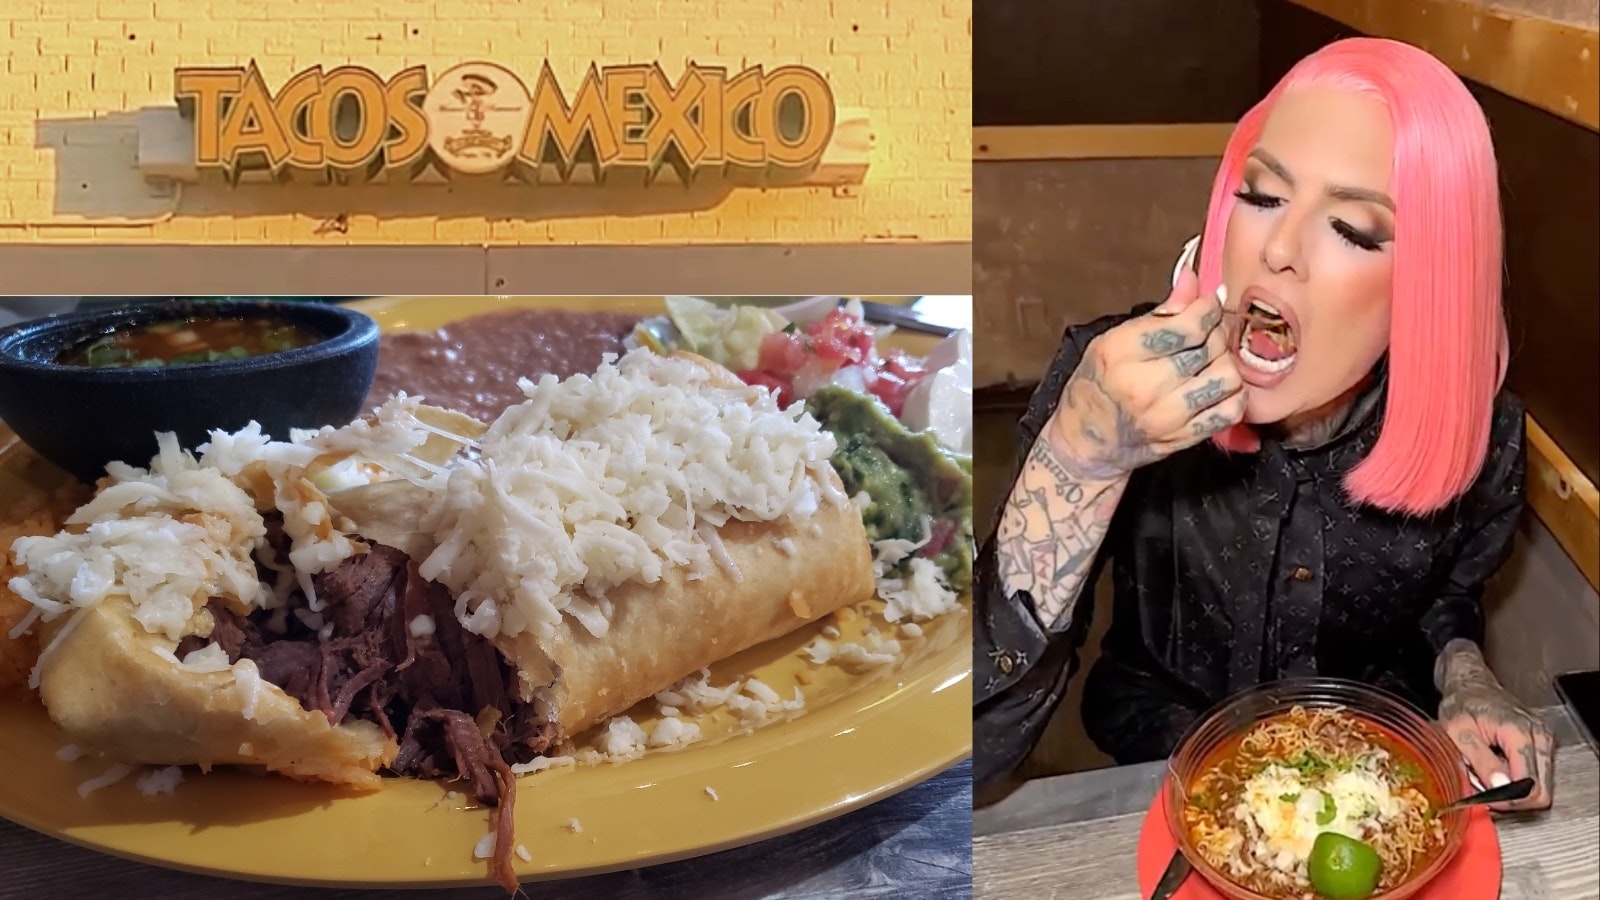 Social media star and Casper business owner Jeffree Star posted a viral Instagram video raving about the yak ramen bowl at Tacos Mexico in Casper, which uses yak meat from his Wyoming ranch.